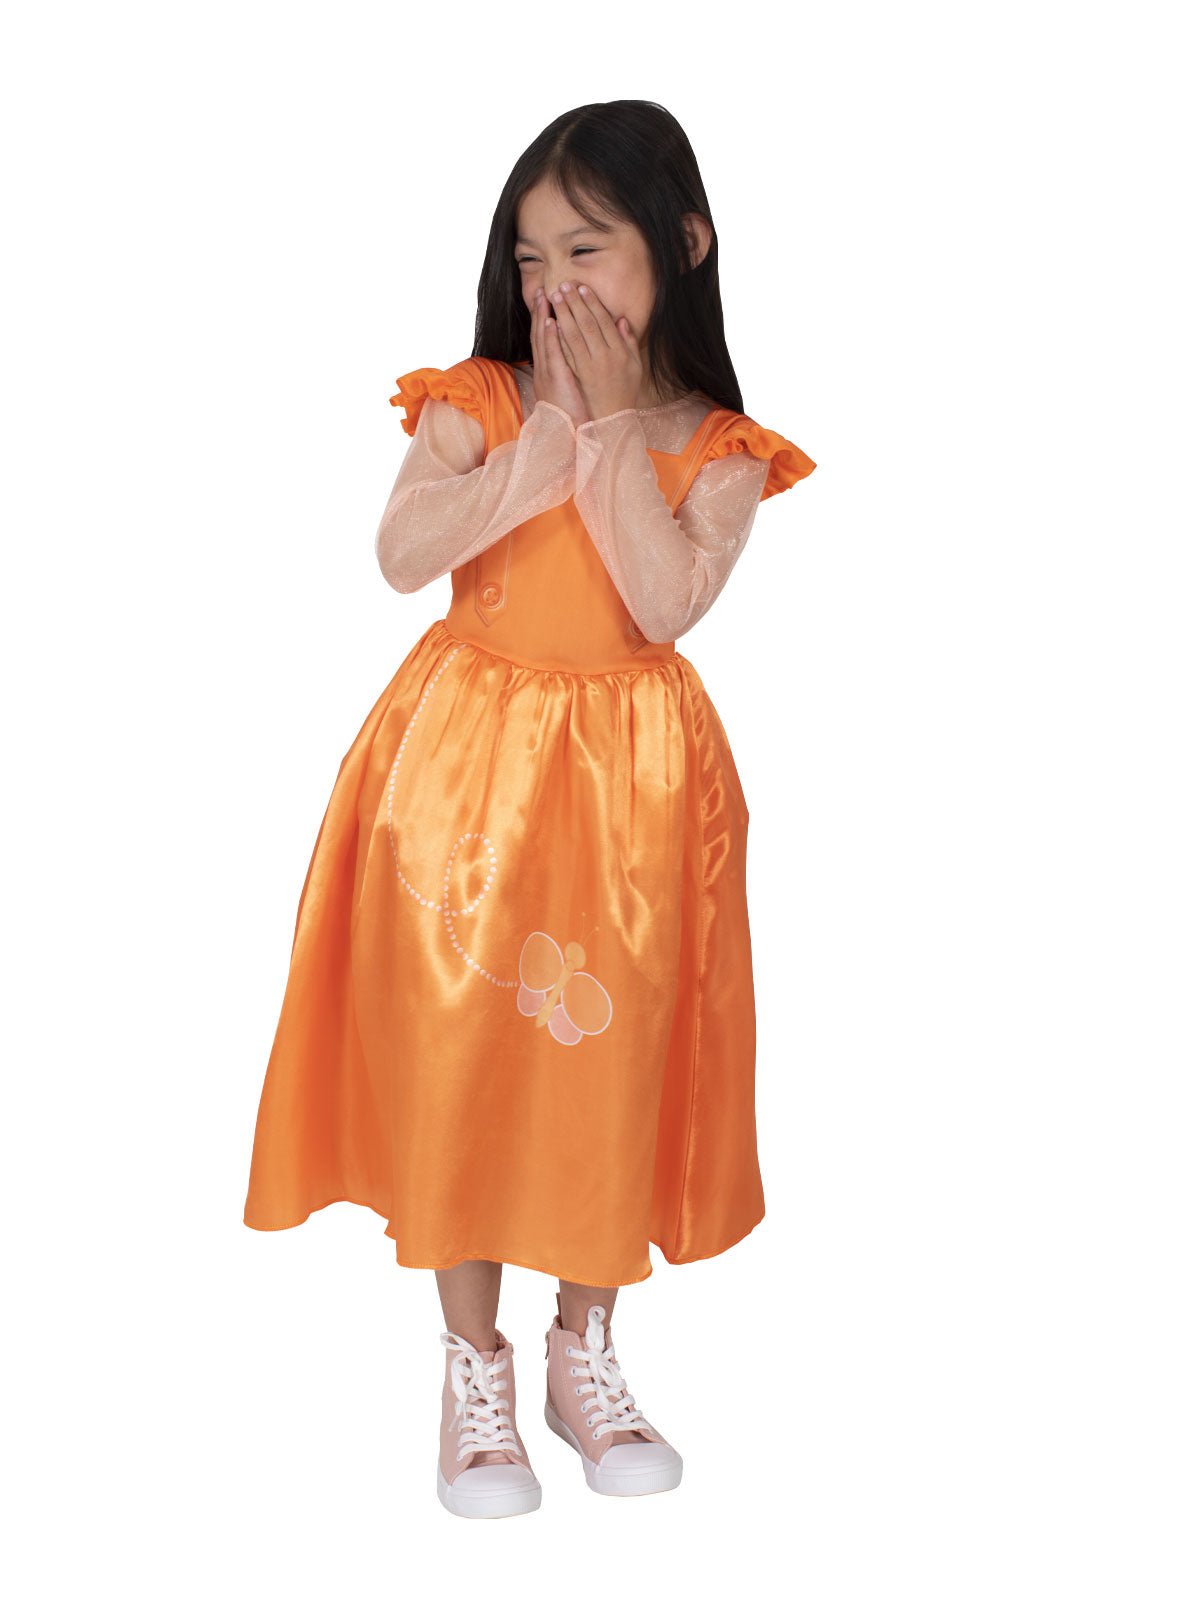 Orange Dress with Butterfly Design